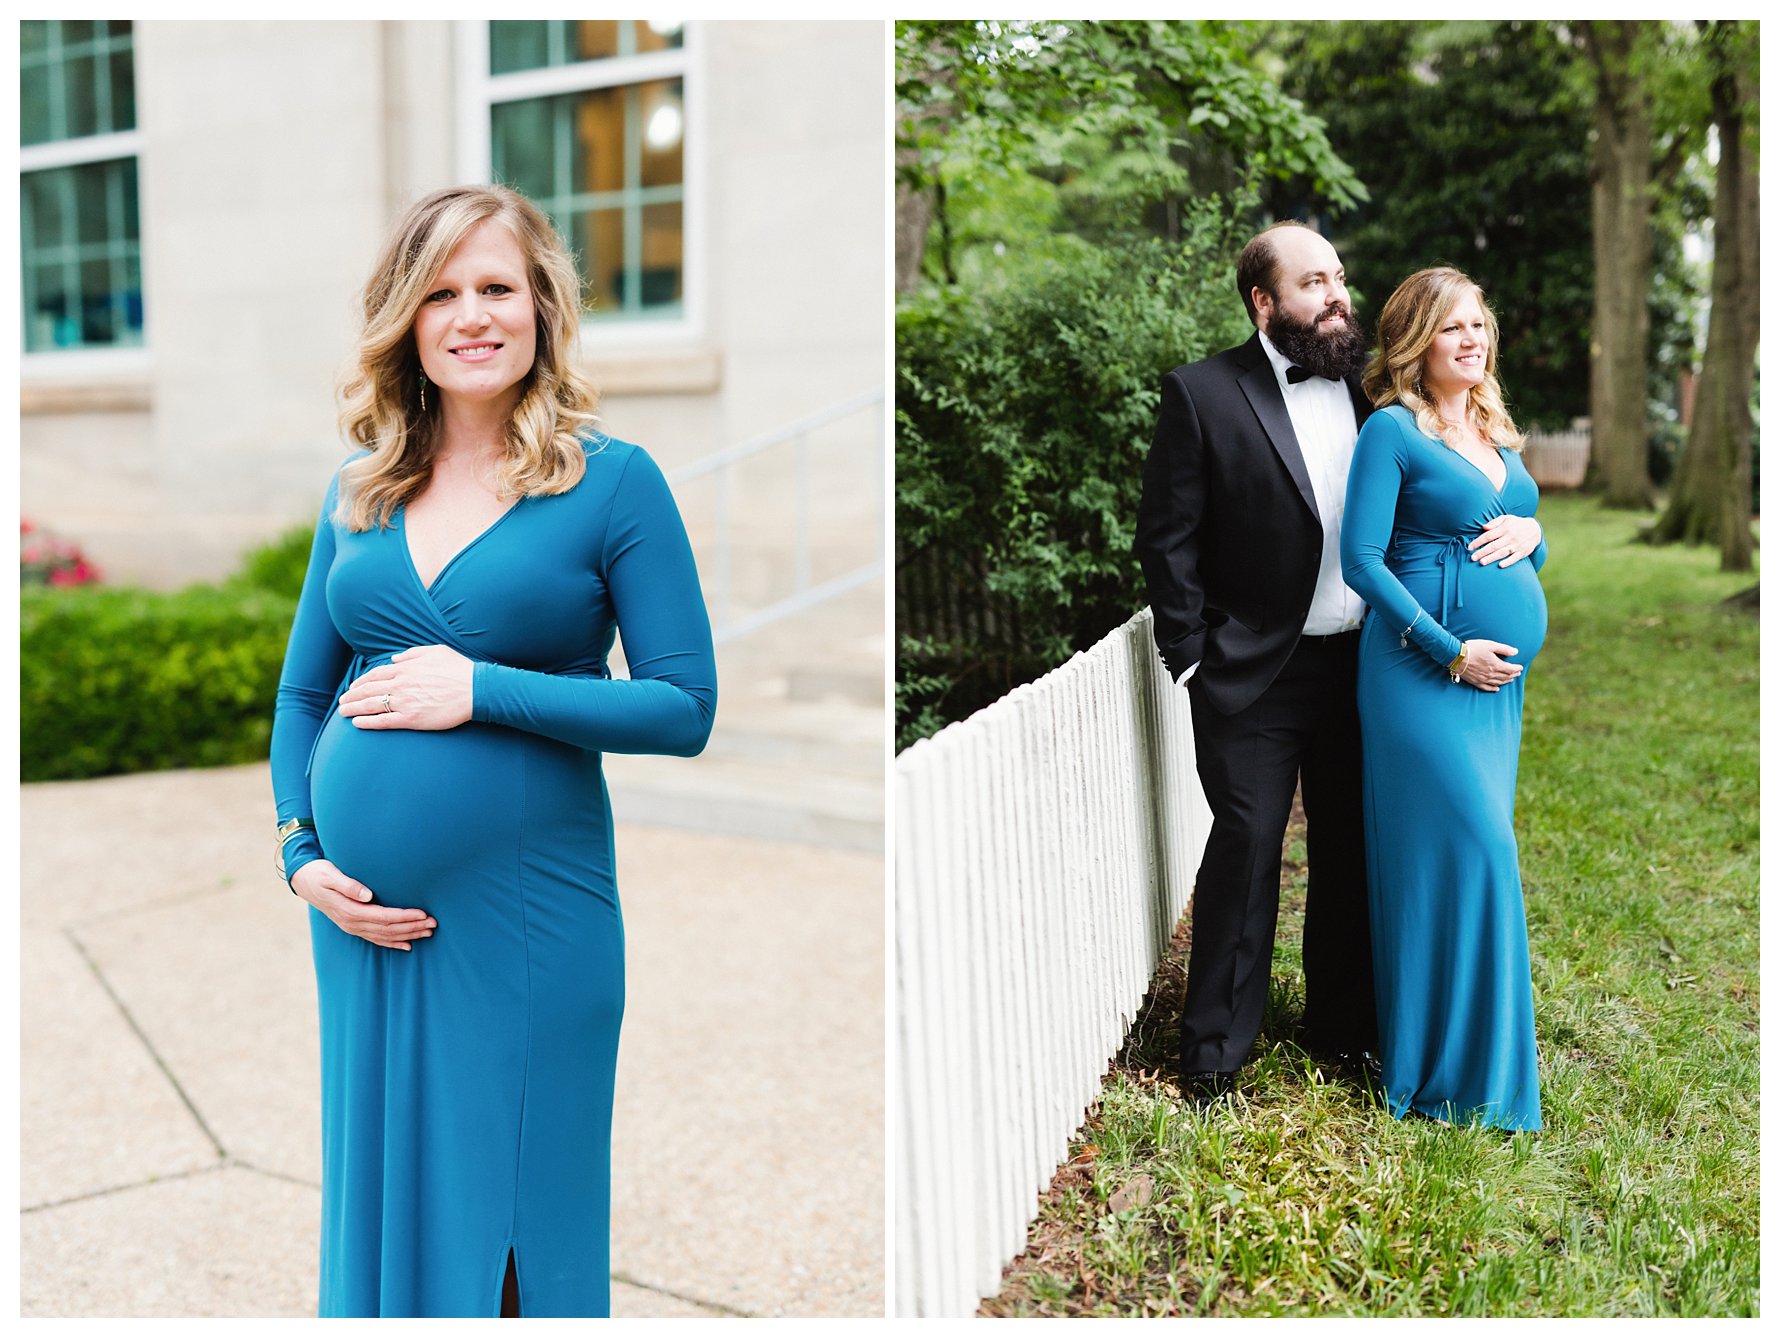 A Formal and Classic Look for Maternity Photos